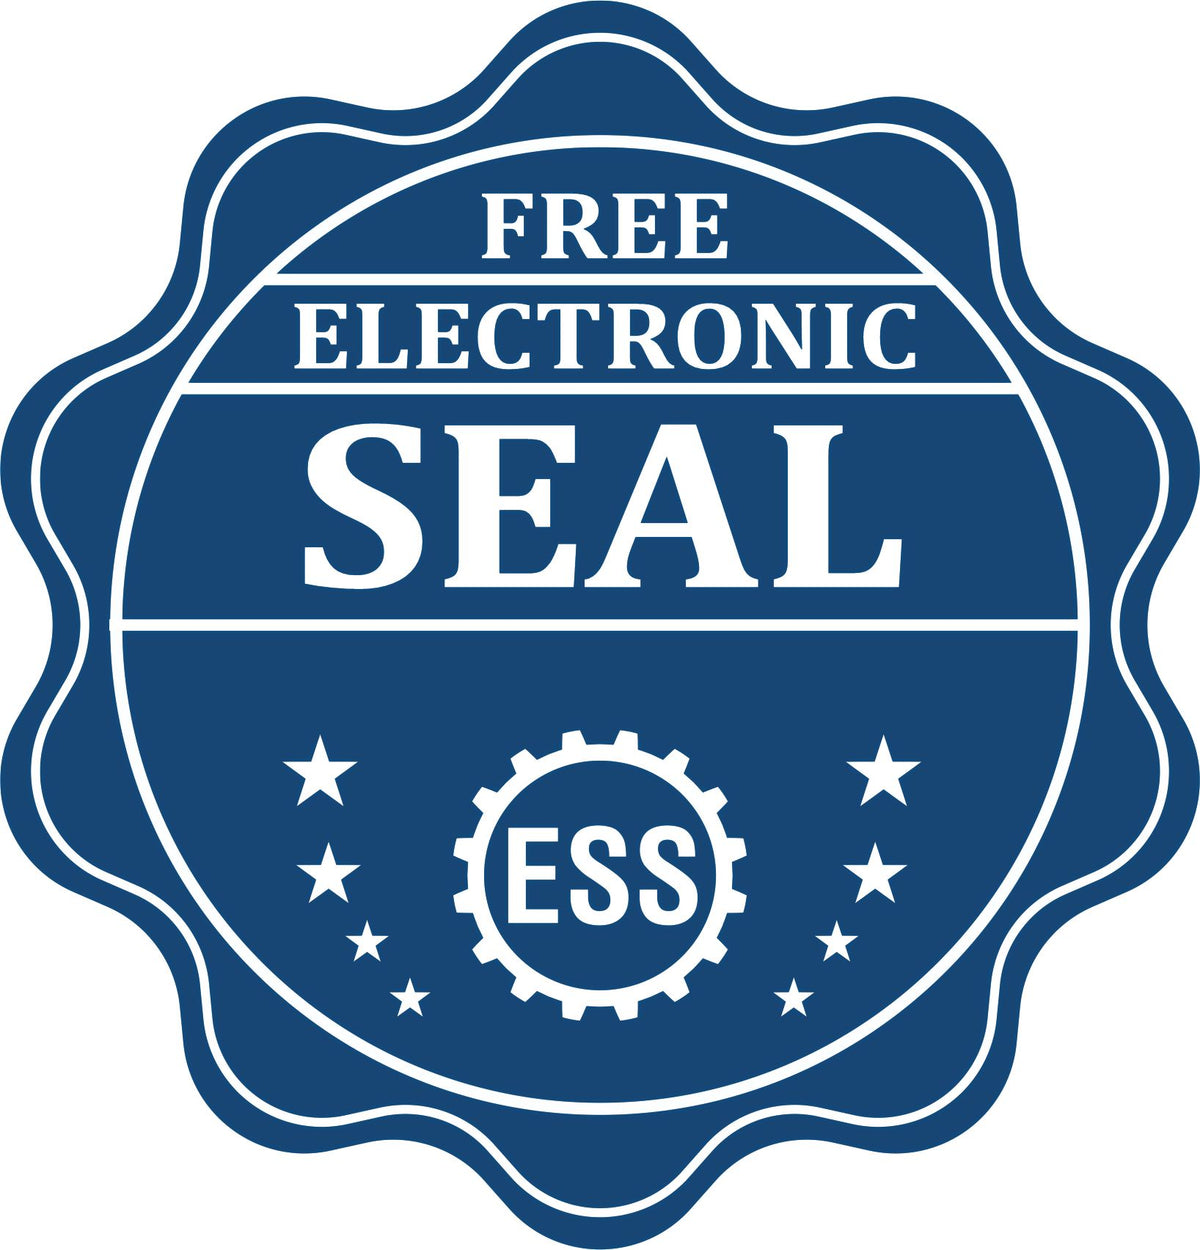 A badge showing a free electronic seal for the State of Pennsylvania Architectural Seal Embosser with stars and the ESS gear on the emblem.